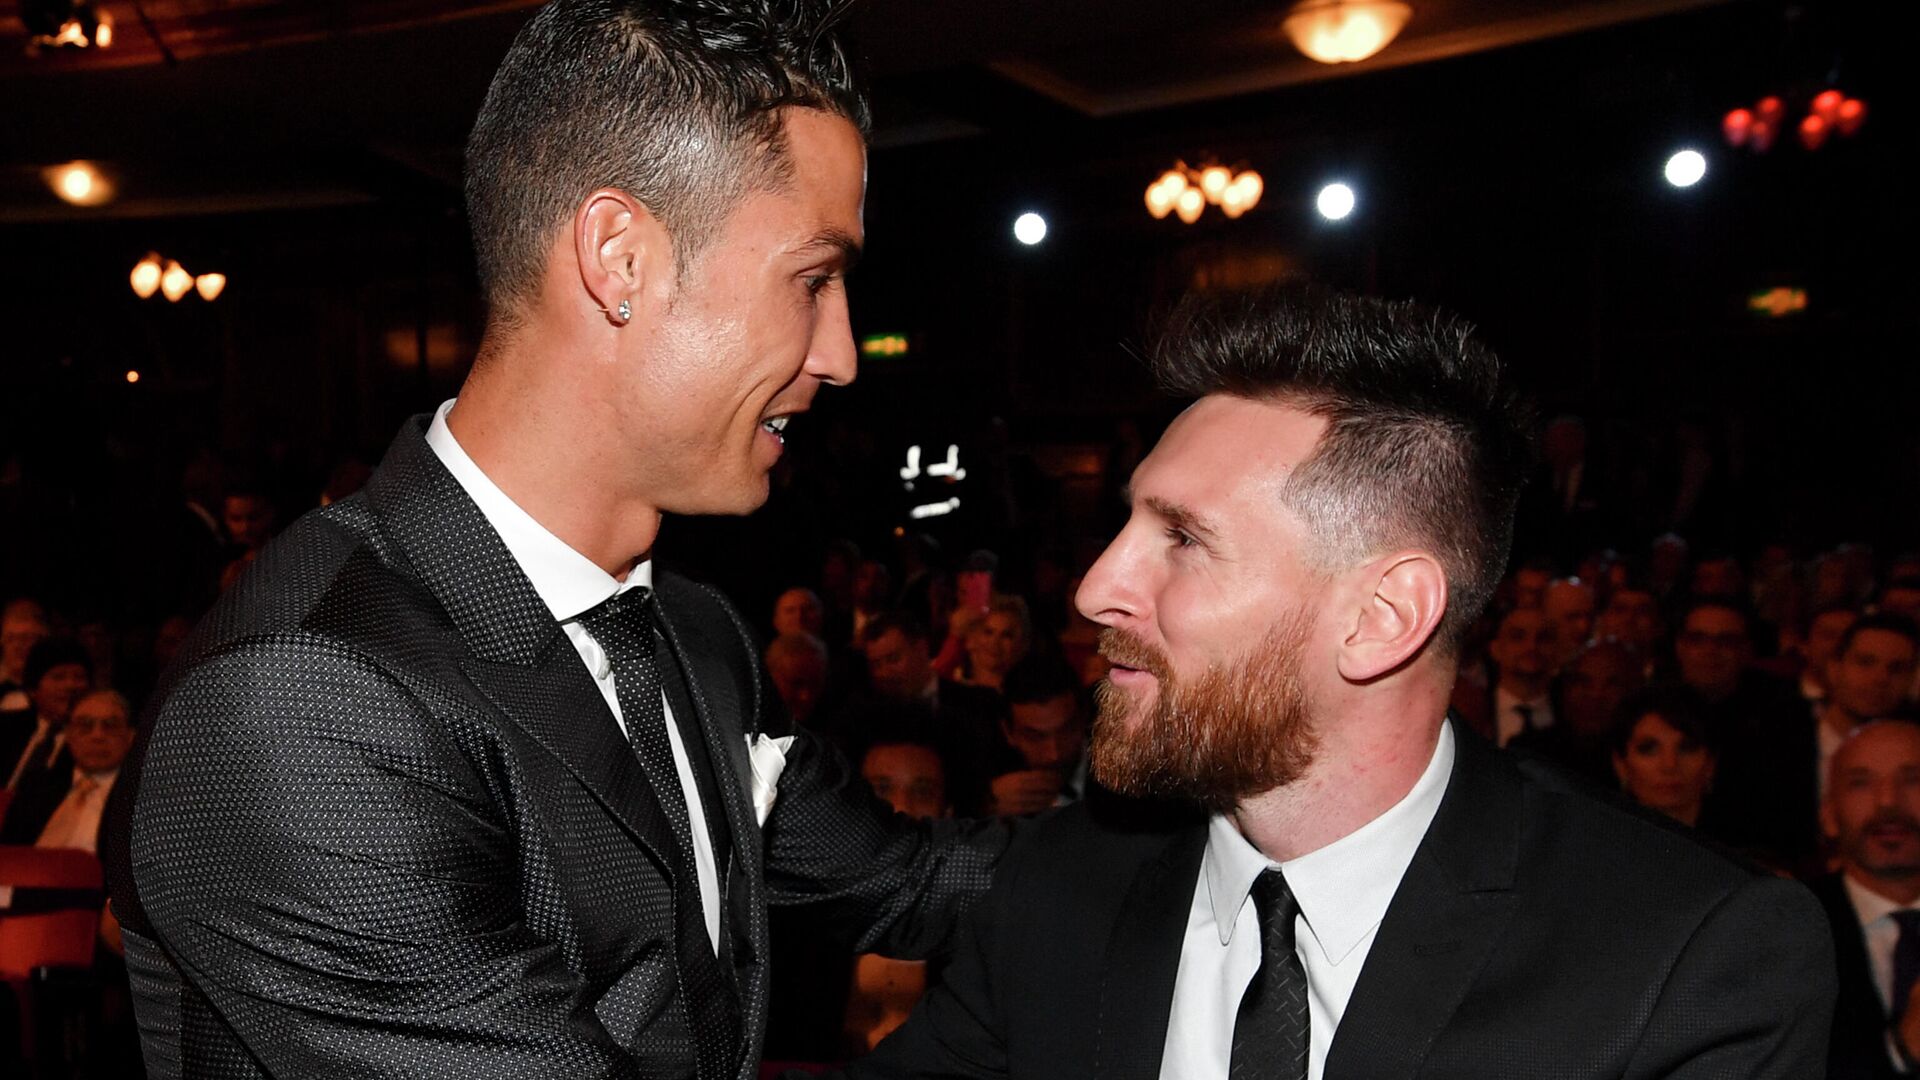 Nominees for the Best FIFA football player, Barcelona and Argentina forward Lionel Messi (R) and Real Madrid and Portugal forward Cristiano Ronaldo (L) chat before taking their seats for The Best FIFA Football Awards ceremony, on October 23, 2017 in London - Sputnik International, 1920, 16.03.2022